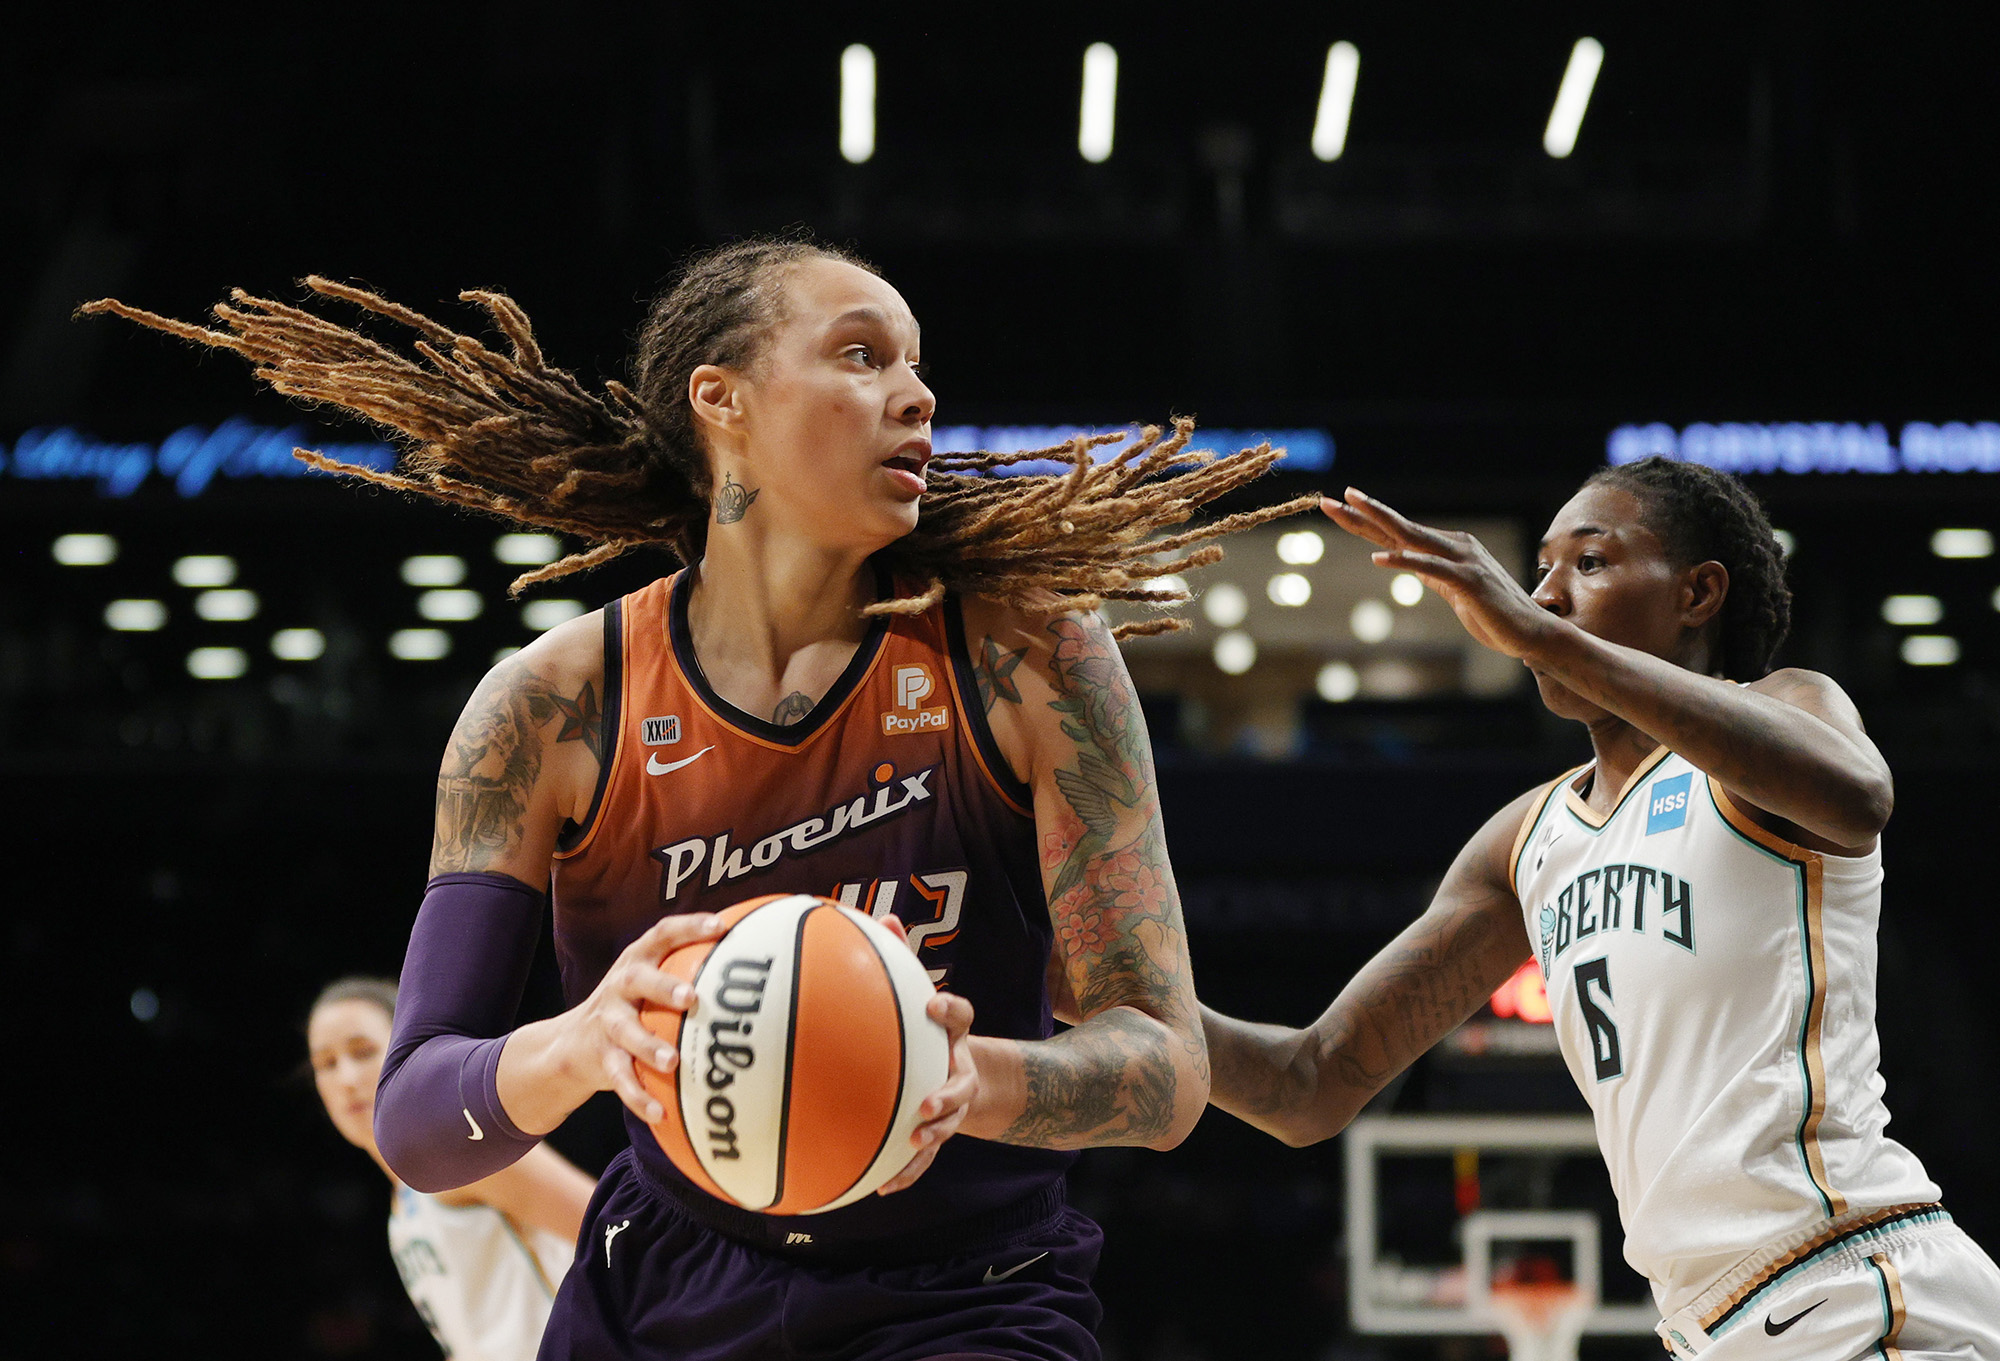 Brittney Griner #42 of the Phoenix Mercury drives to the basket as Natasha Howard #6 of the New York Liberty defends, at the Barclays Center, New York, on August 25.